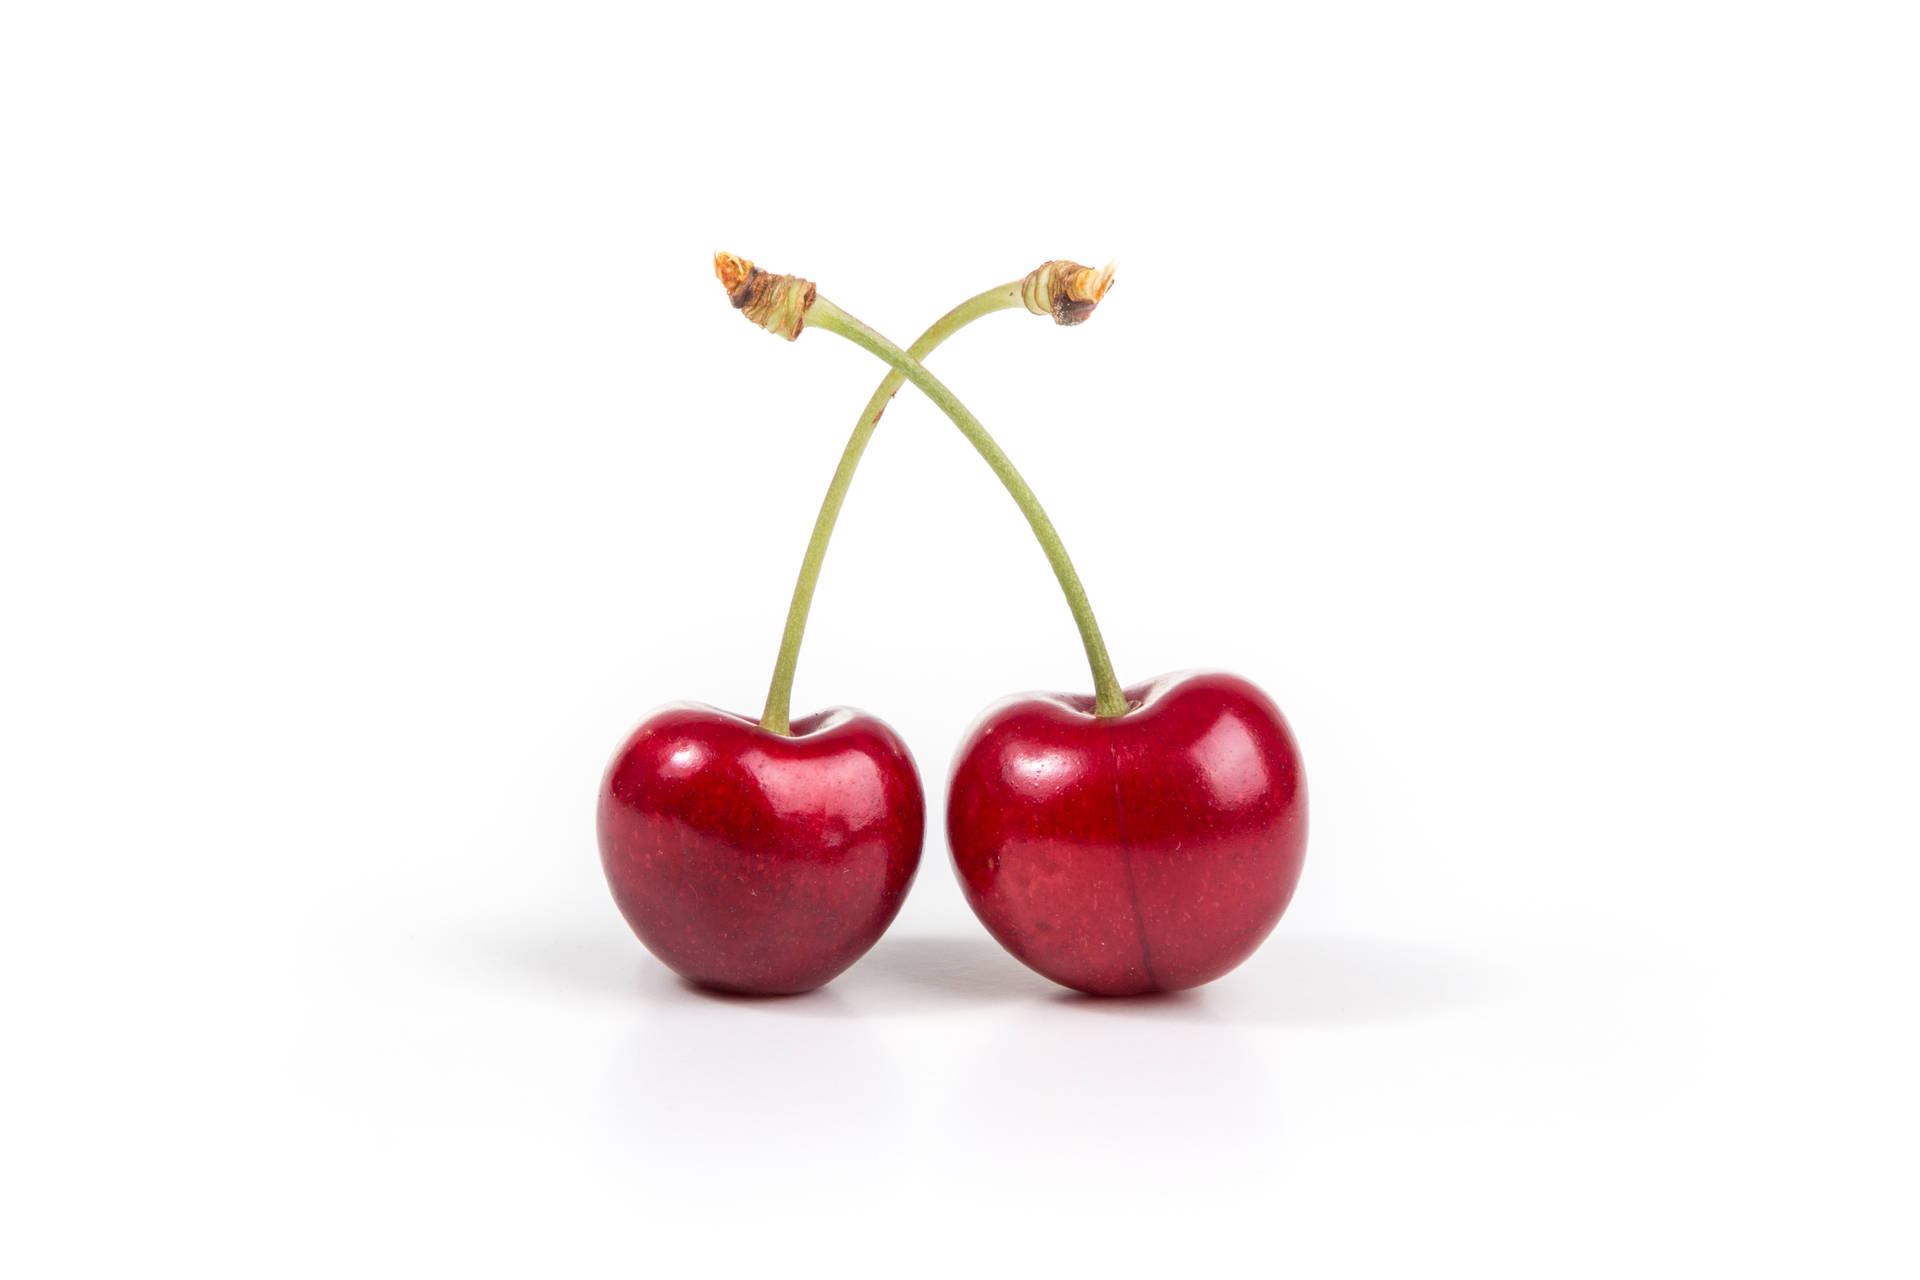 Cherry Fruit With Green Stem